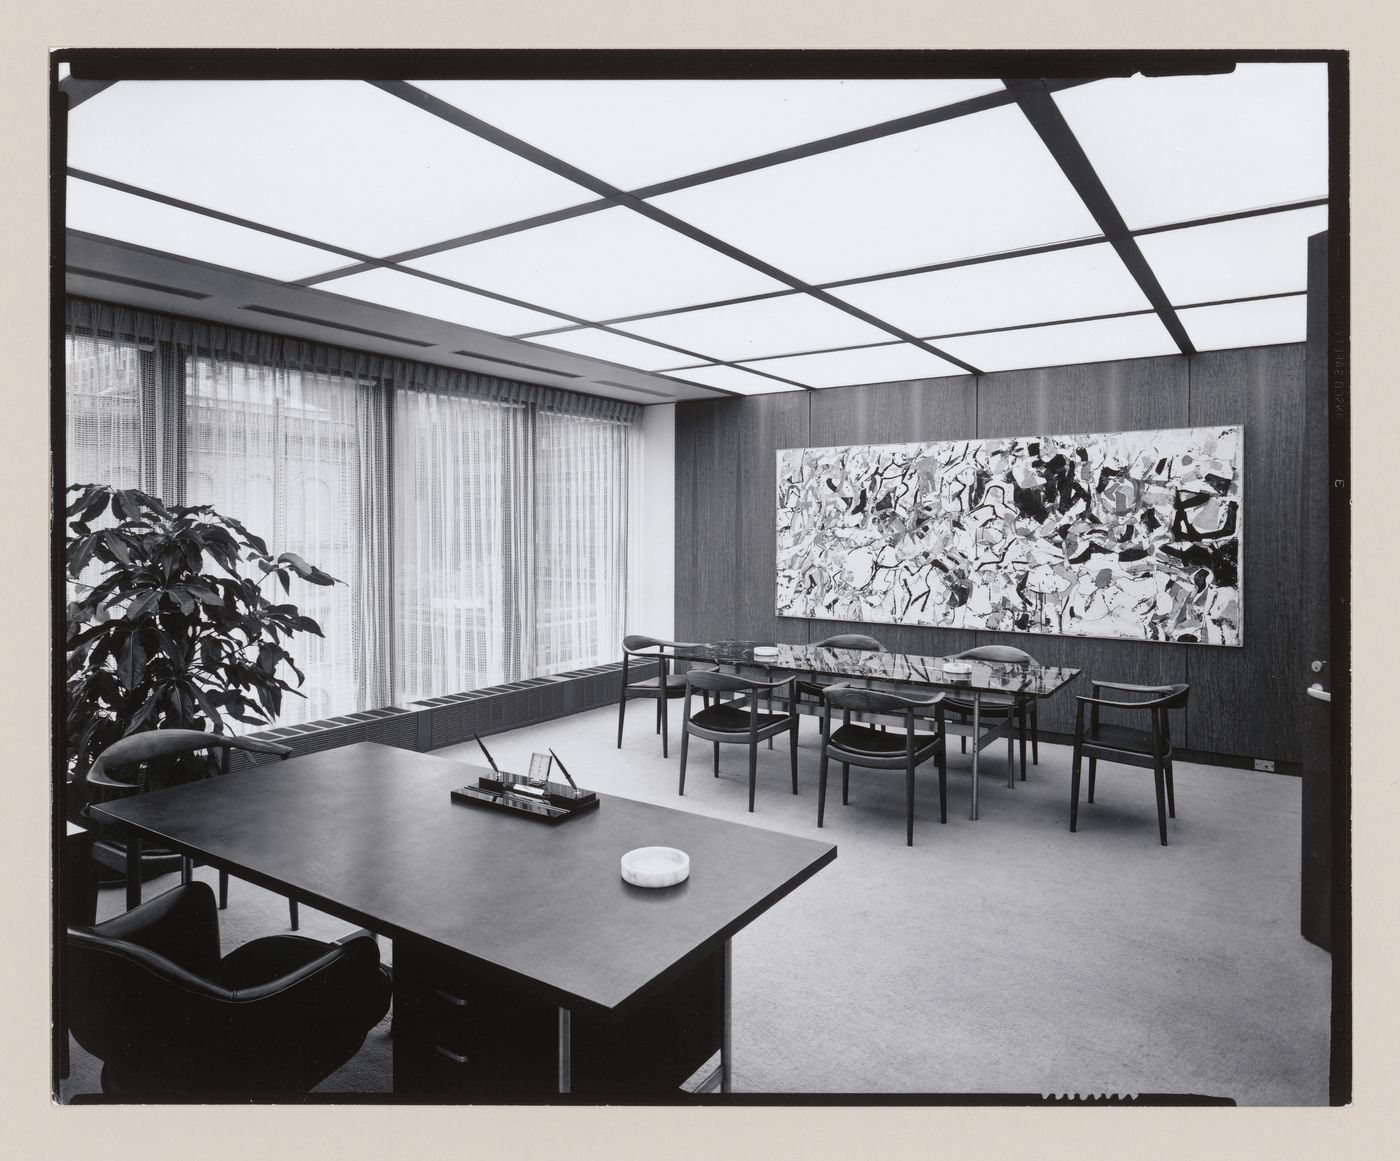 Interior view of the fifth floor executive office and conference room in the Seagram Building showing furniture and the recessed light fixtures designed by Richard Kelly, New York City